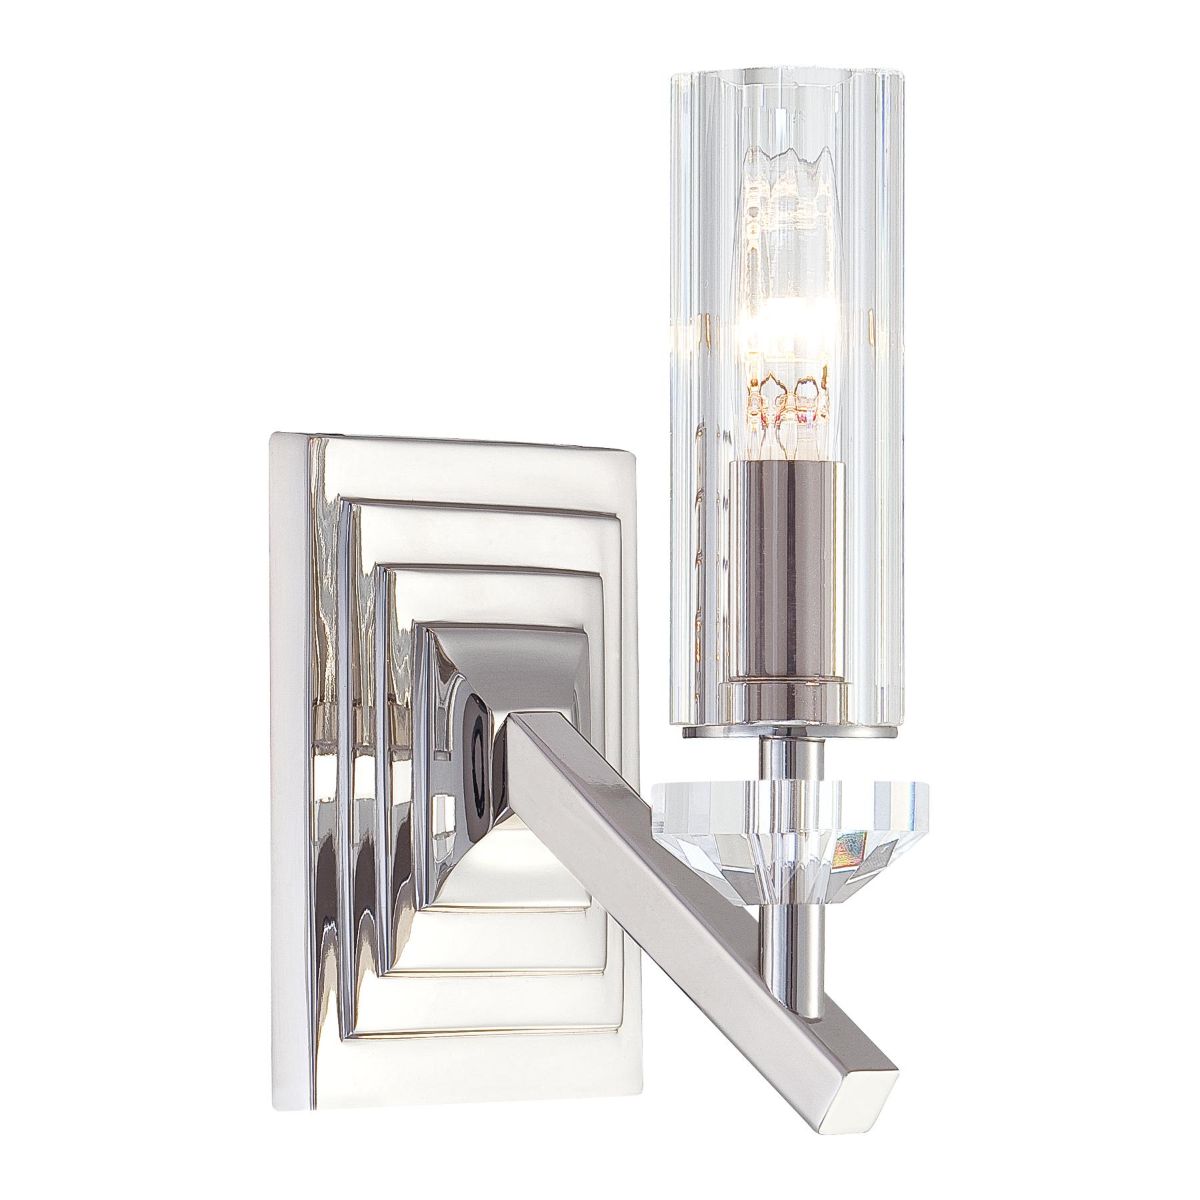 Fusano 10 in. Armed Sconce Polished Nickel finish